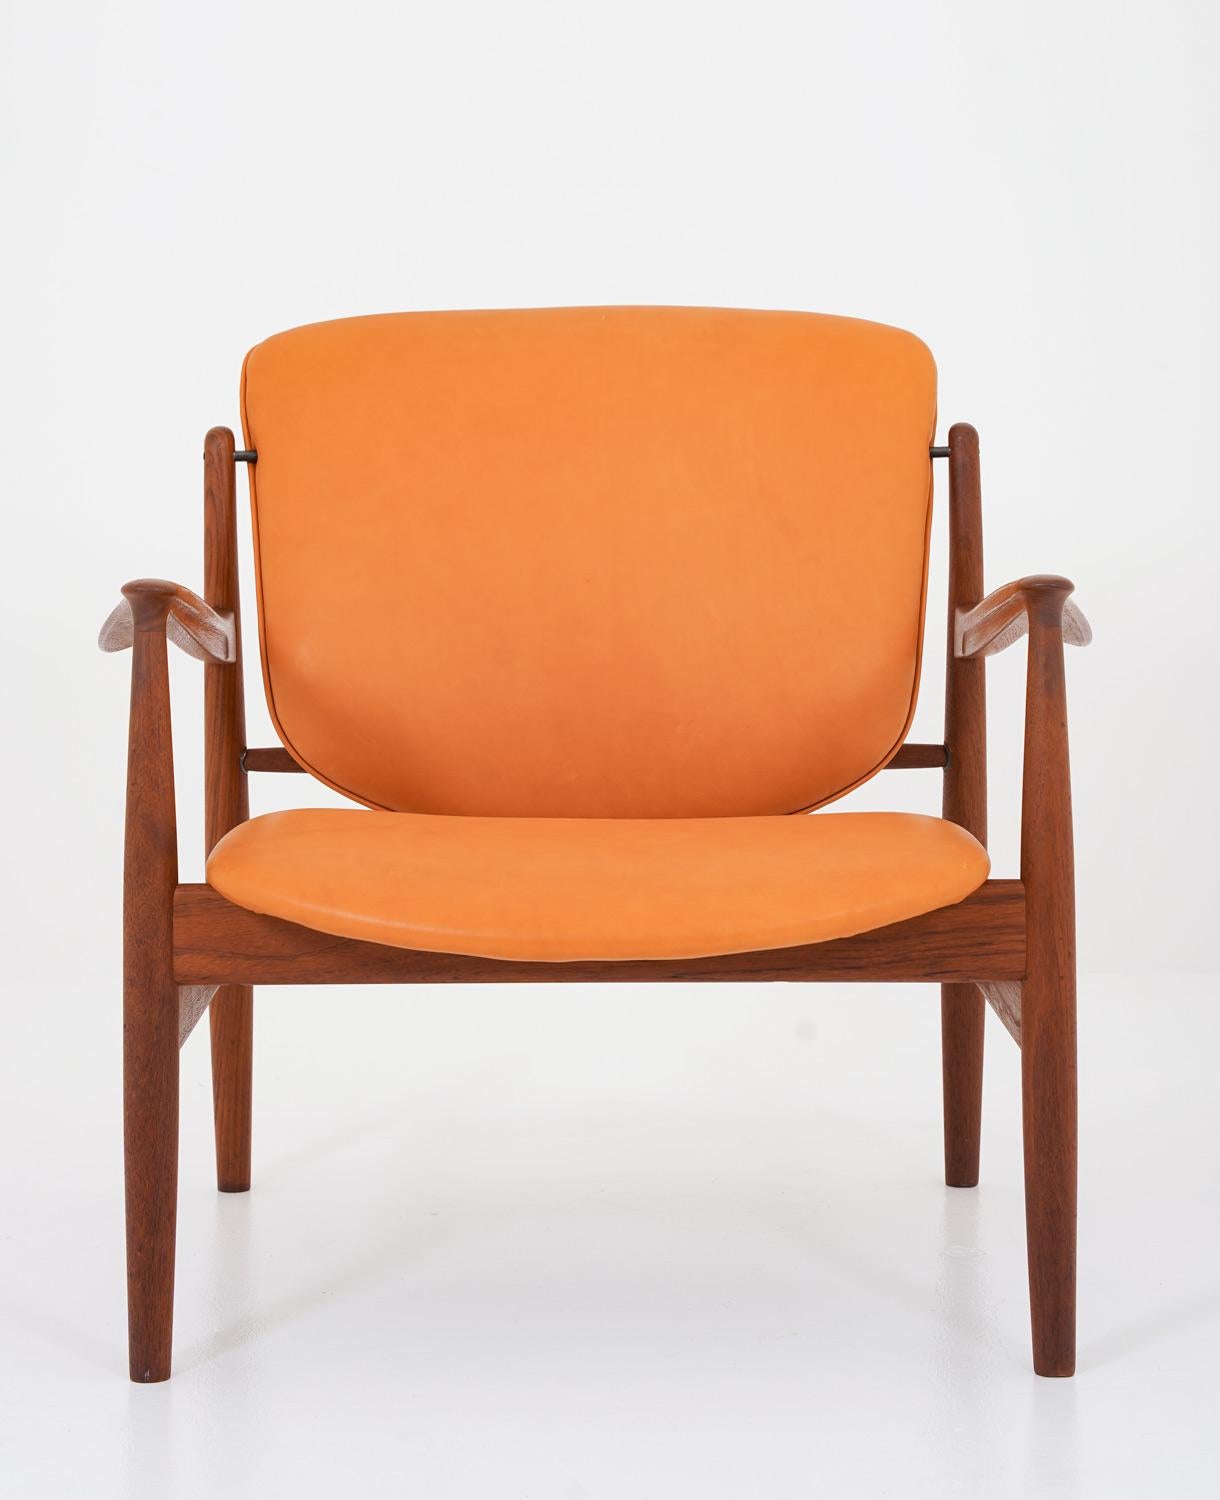 Beautiful lounge chair model FD 136 by Finn Juhl for France & Daverkosen, Denmark.
This chair is features a beautifully shaped teak frame, supporting pillows in cognac coloured leather. 

Condition: Very good condition with light signs of use. The